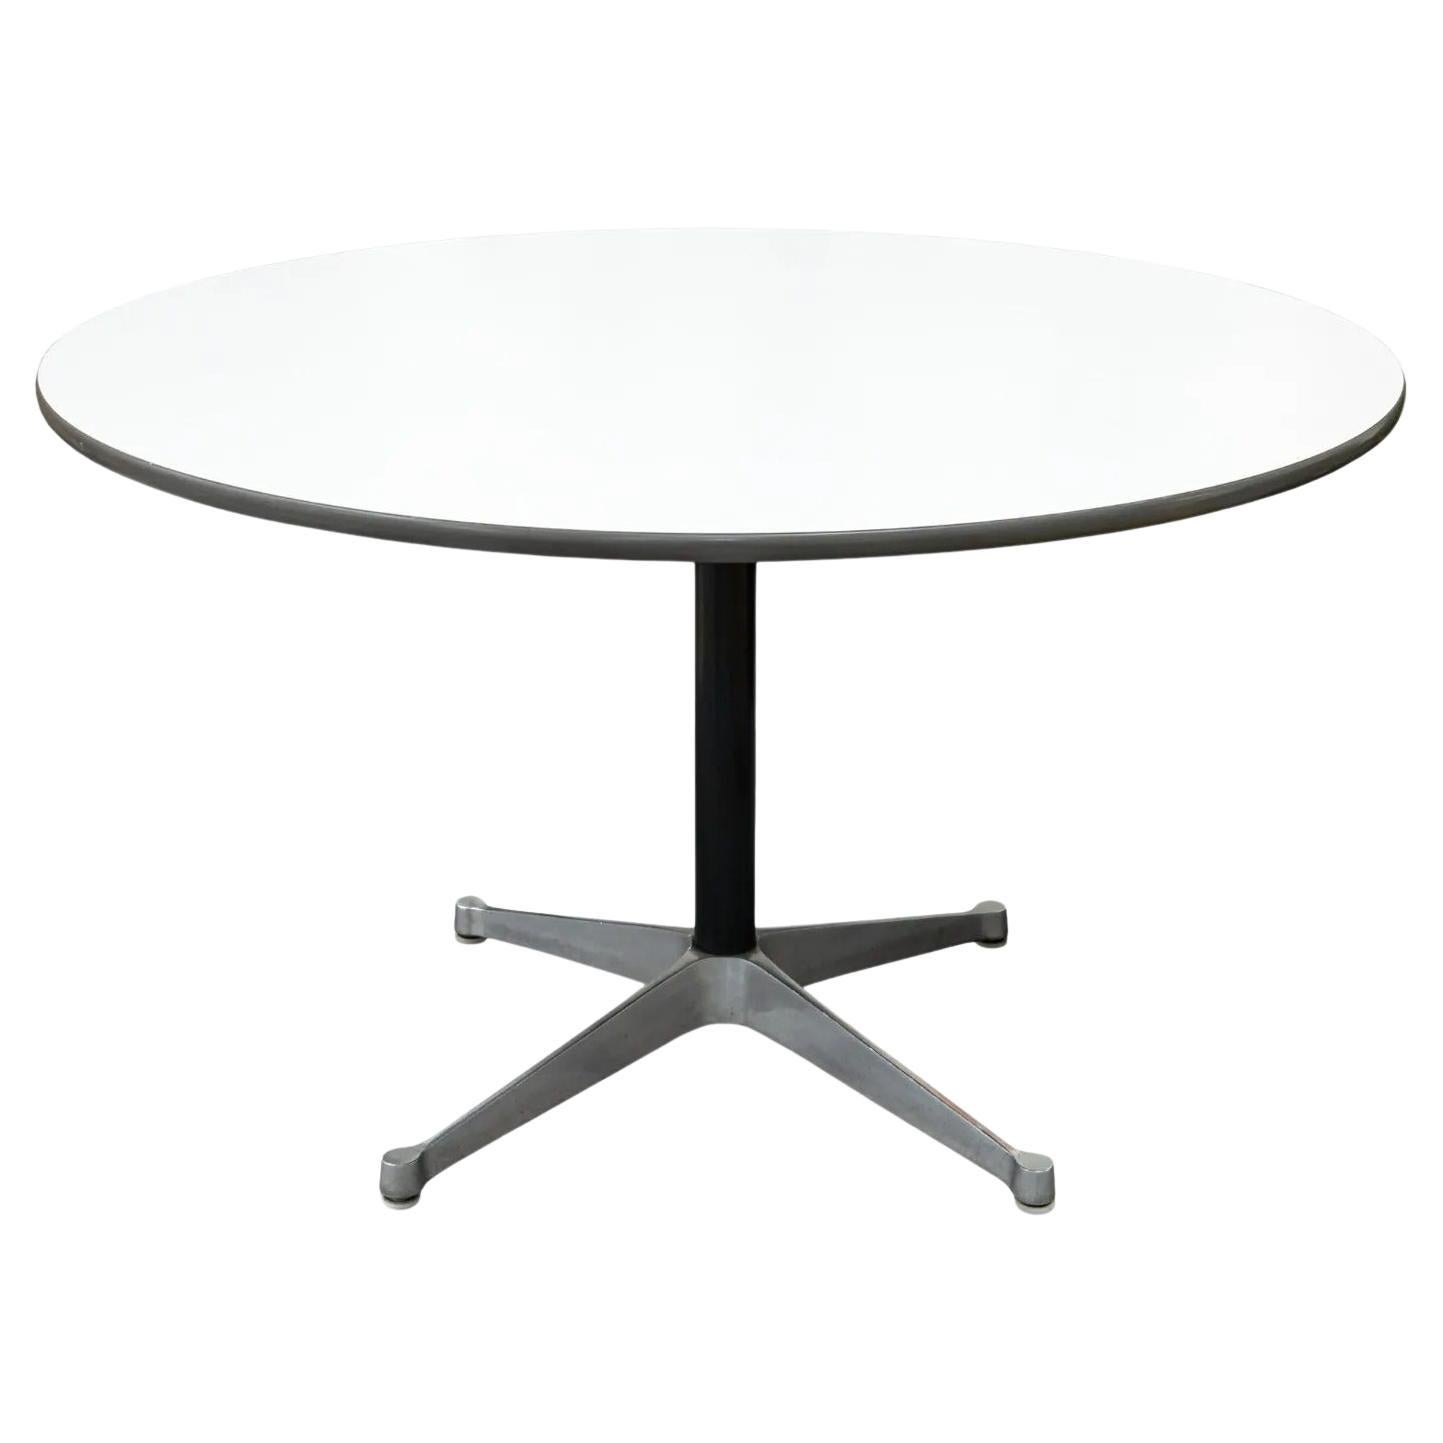 Herman Miller White Laminate Round Dinette Table with Aluminum Base